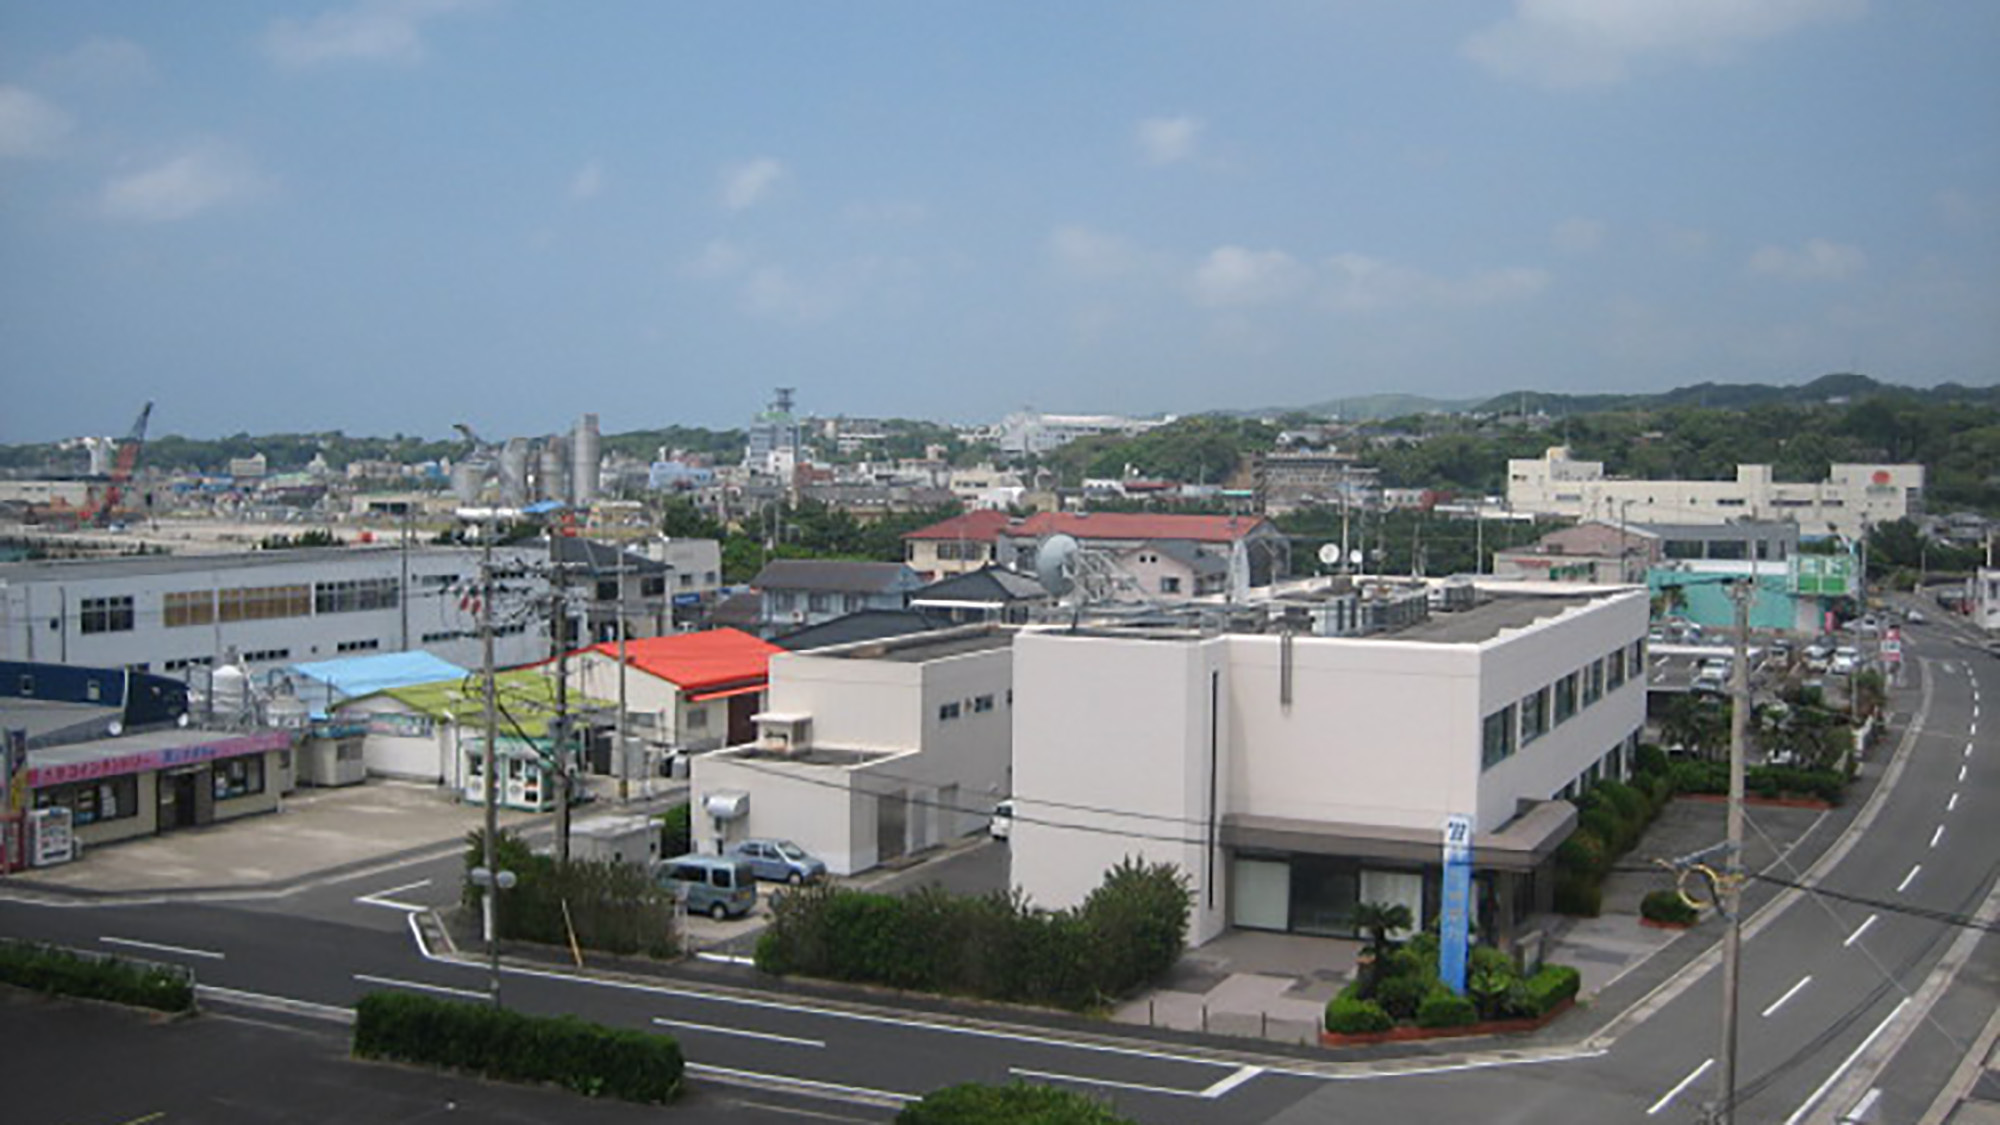 Business Inn Tanegashima (Tanegashima) Business Inn Tanegashima (Tanegashima) is conveniently located in the popular Nishinoomote area. The property features a wide range of facilities to make your stay a pleasant experience. All the neces